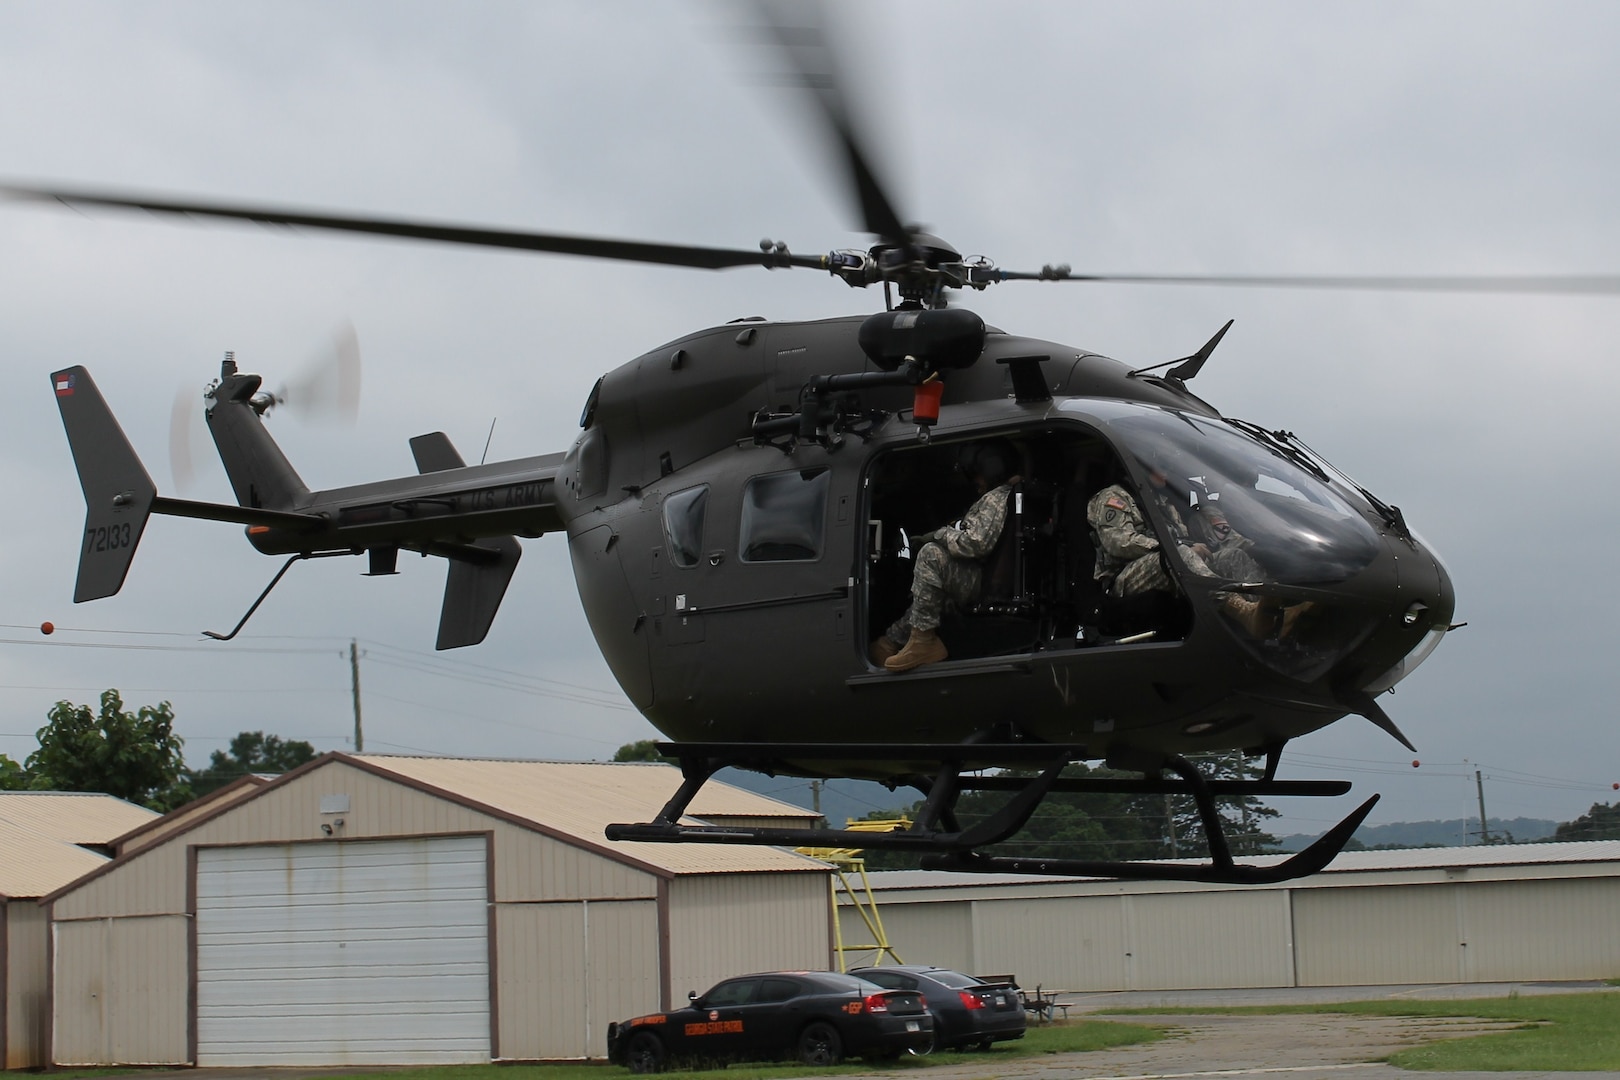 A Georgia Army National Guard Lakota Helicopter departs from Cartersville Airport after picking up a Georgia State Patrolman. Air crew members from Georgia's Army National Guard Counter Drug Task Force patrolled the skies north of Rome looking for marijuana grows Thursday. They harvested more than 20 plants thereby keeping $40,000 of dope off the streets of Georgia.